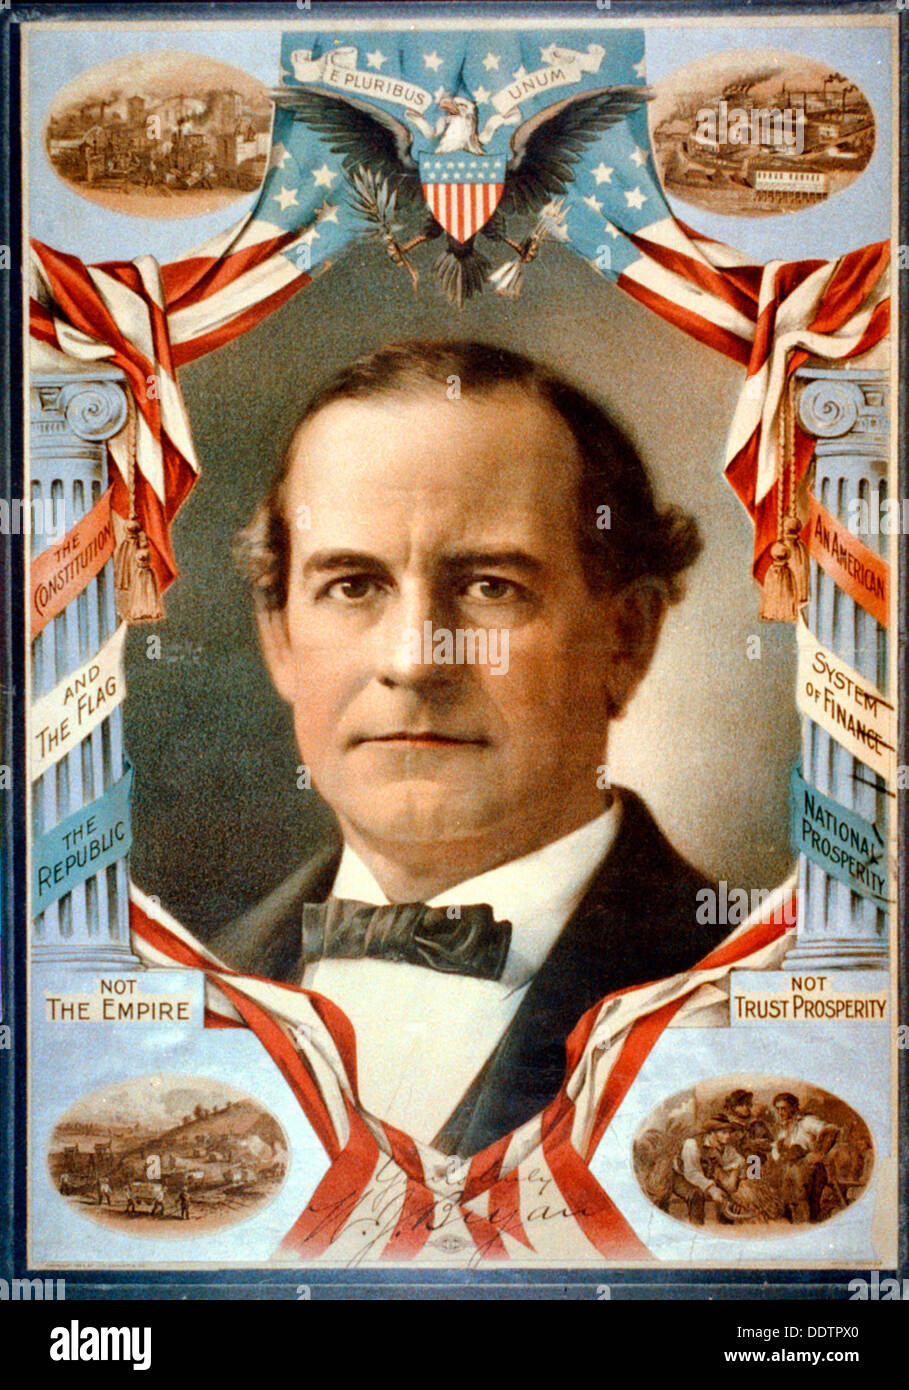 The Constitution and the flag. The republic not the empire. An American system of finance. National prosperity not trust prosperity - William Jennings Bryan Presidential campaign poster Stock Photo